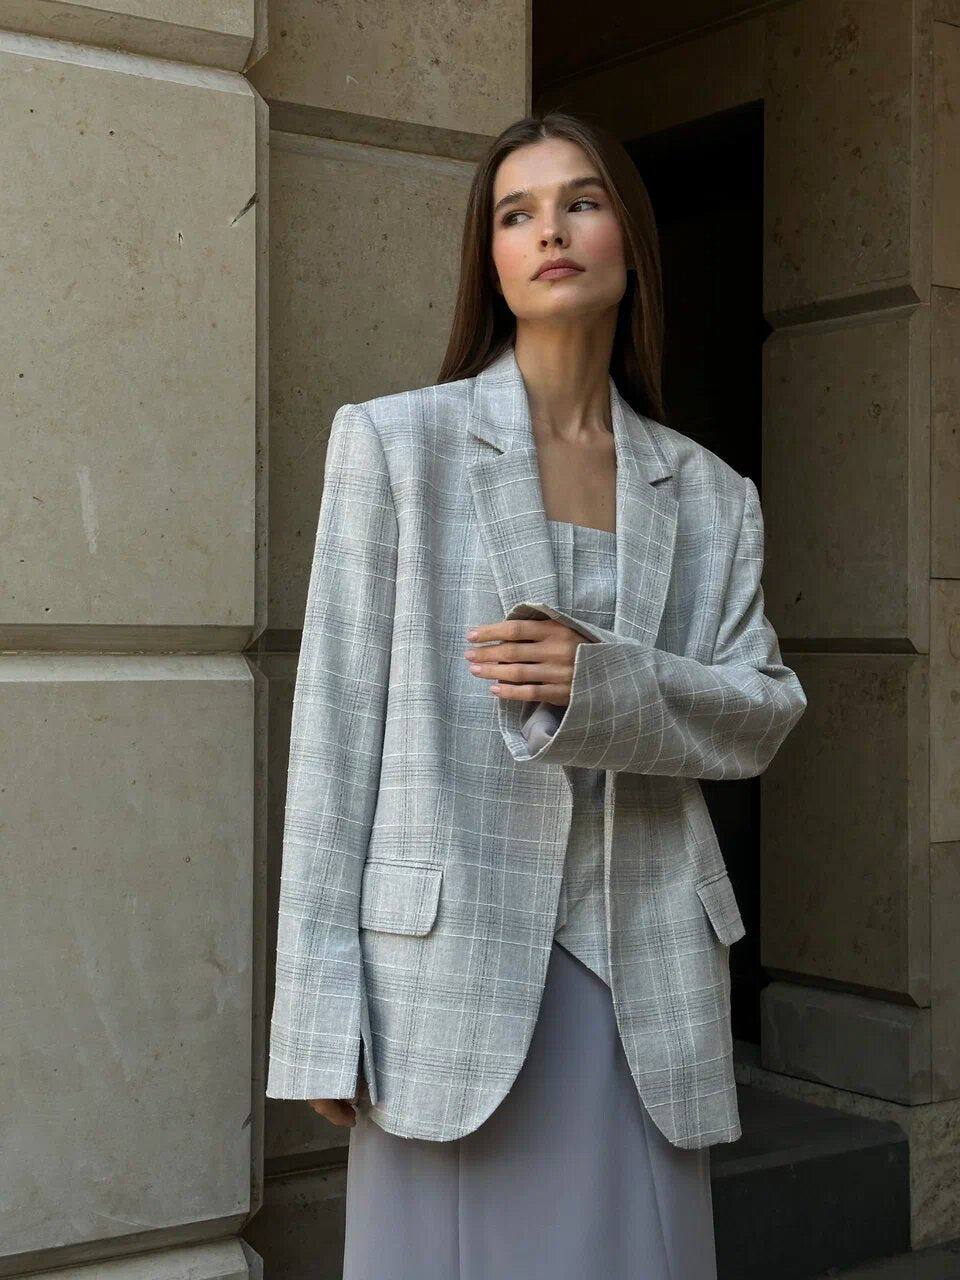 Checkered jacket with rounded lapels